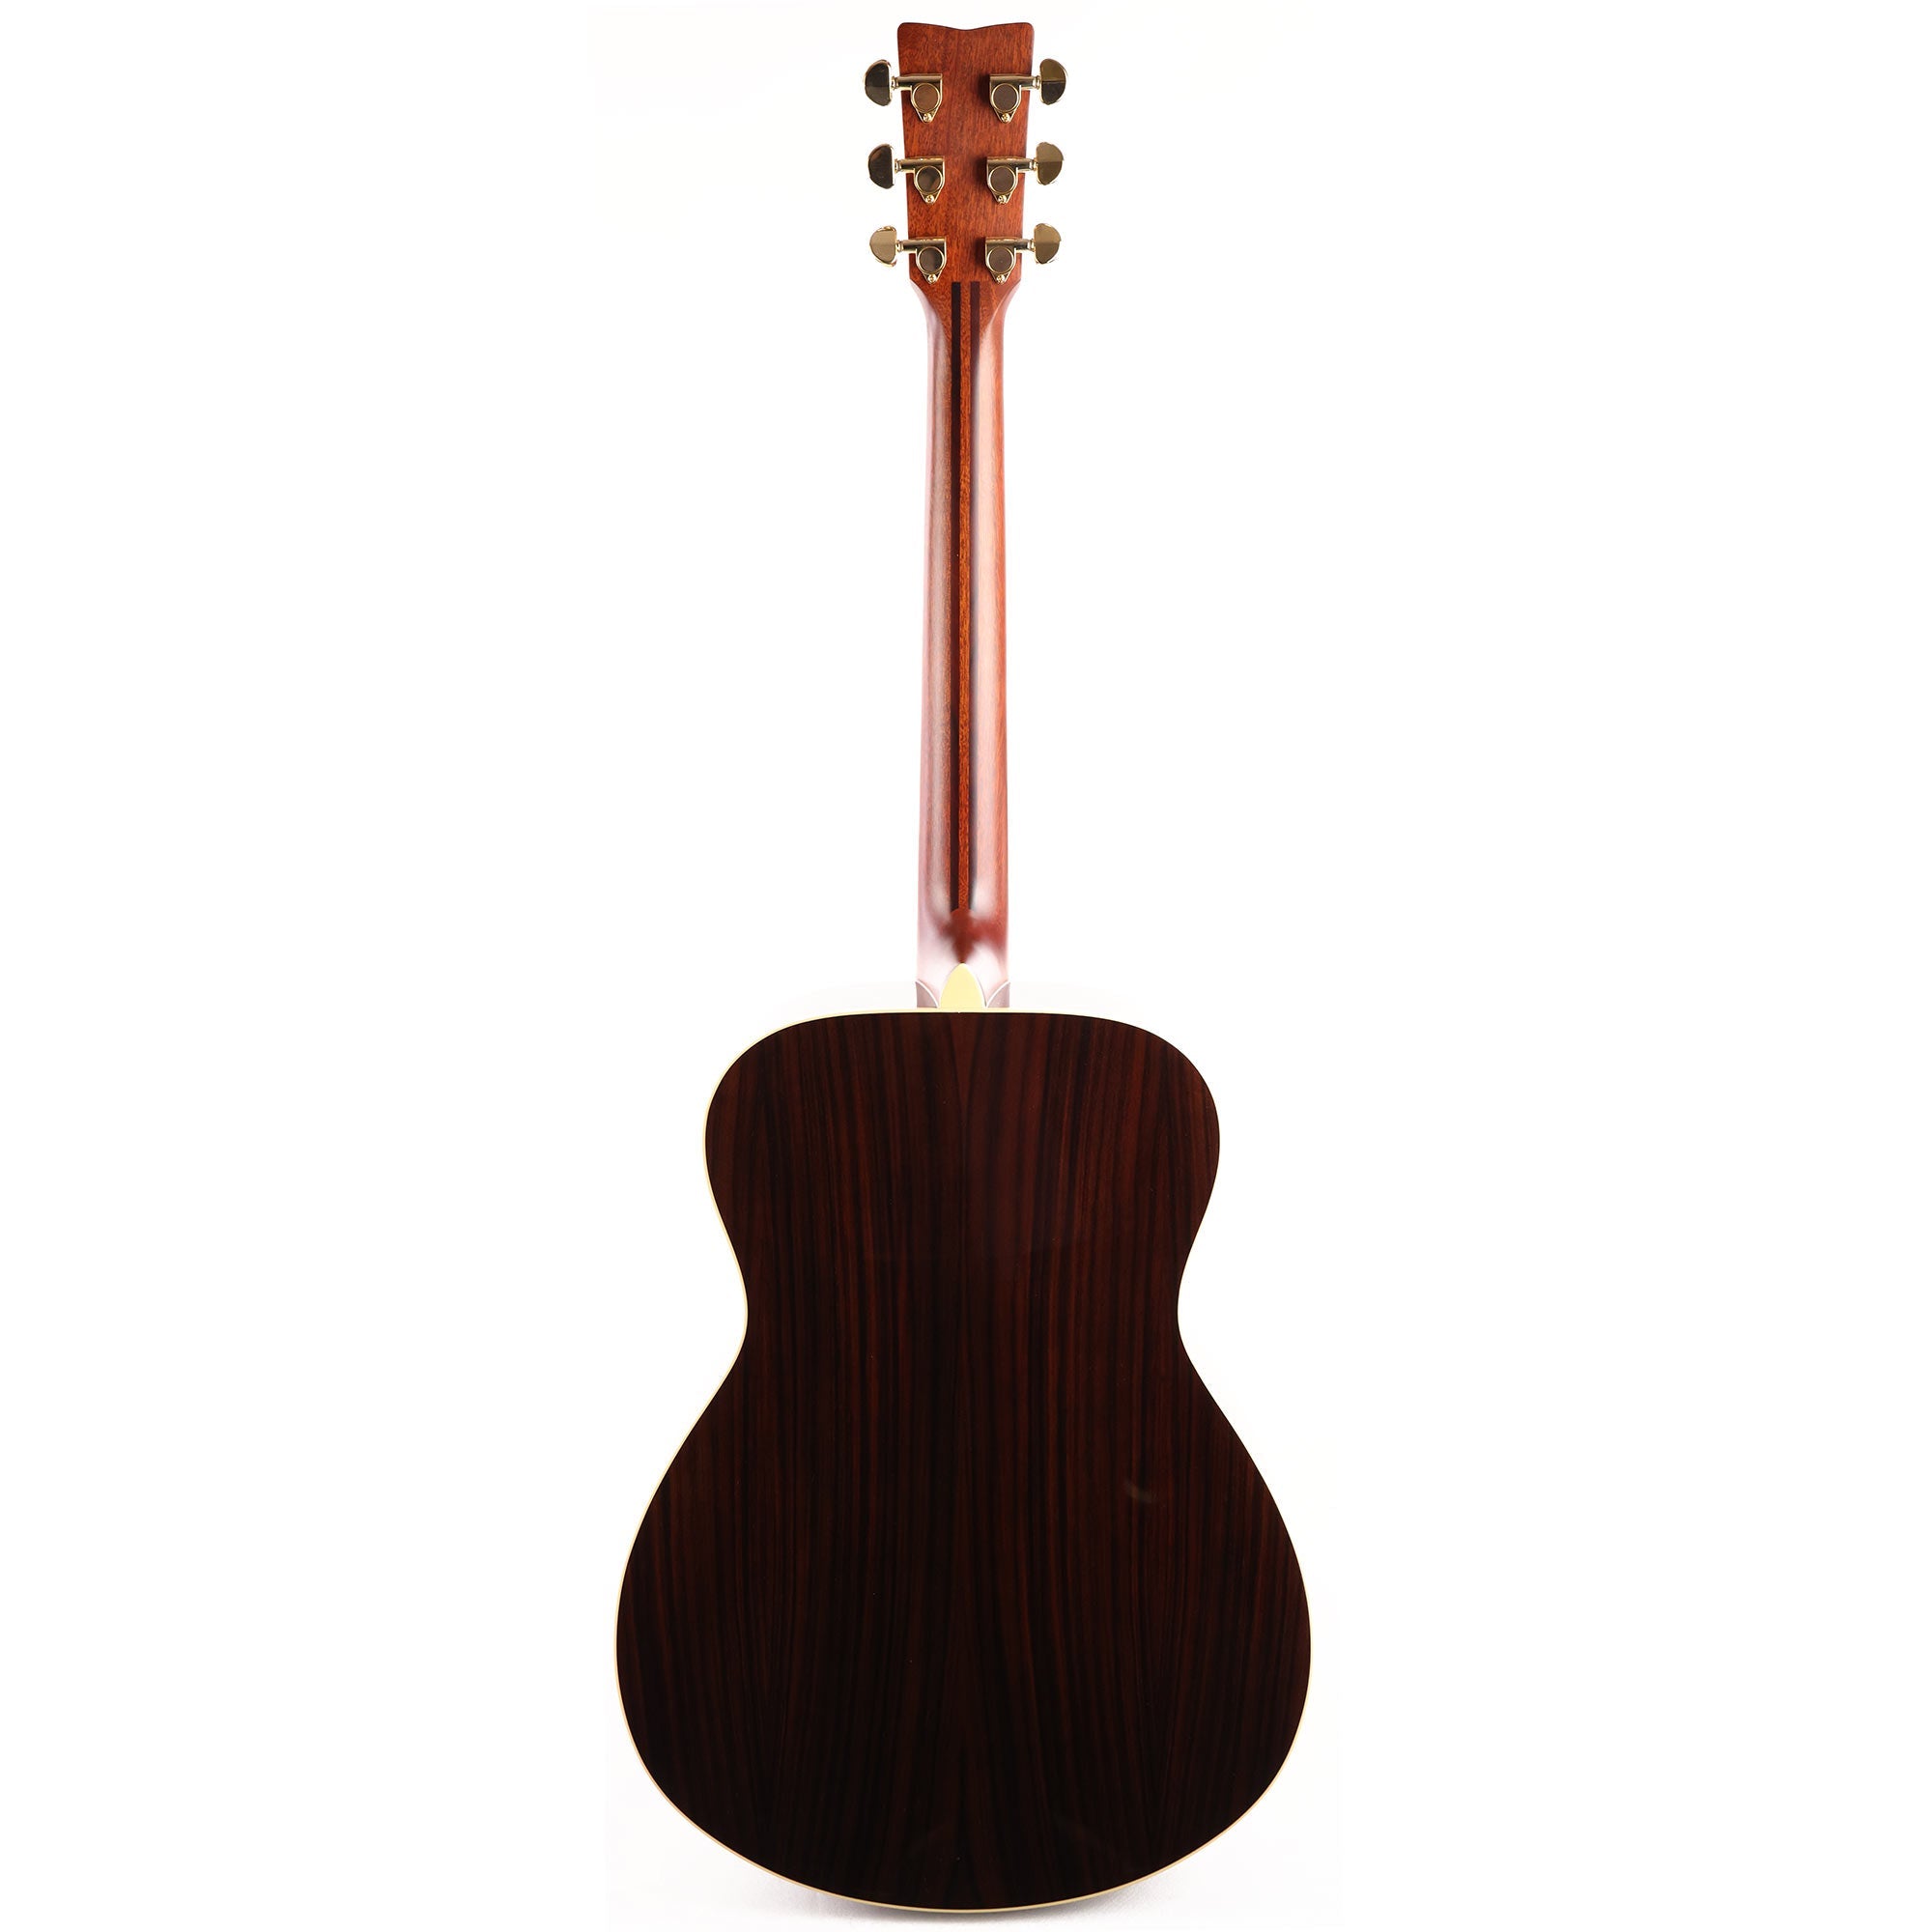 Yamaha LS6 ARE Acoustic Guitar Brown Sunburst | The Music Zoo